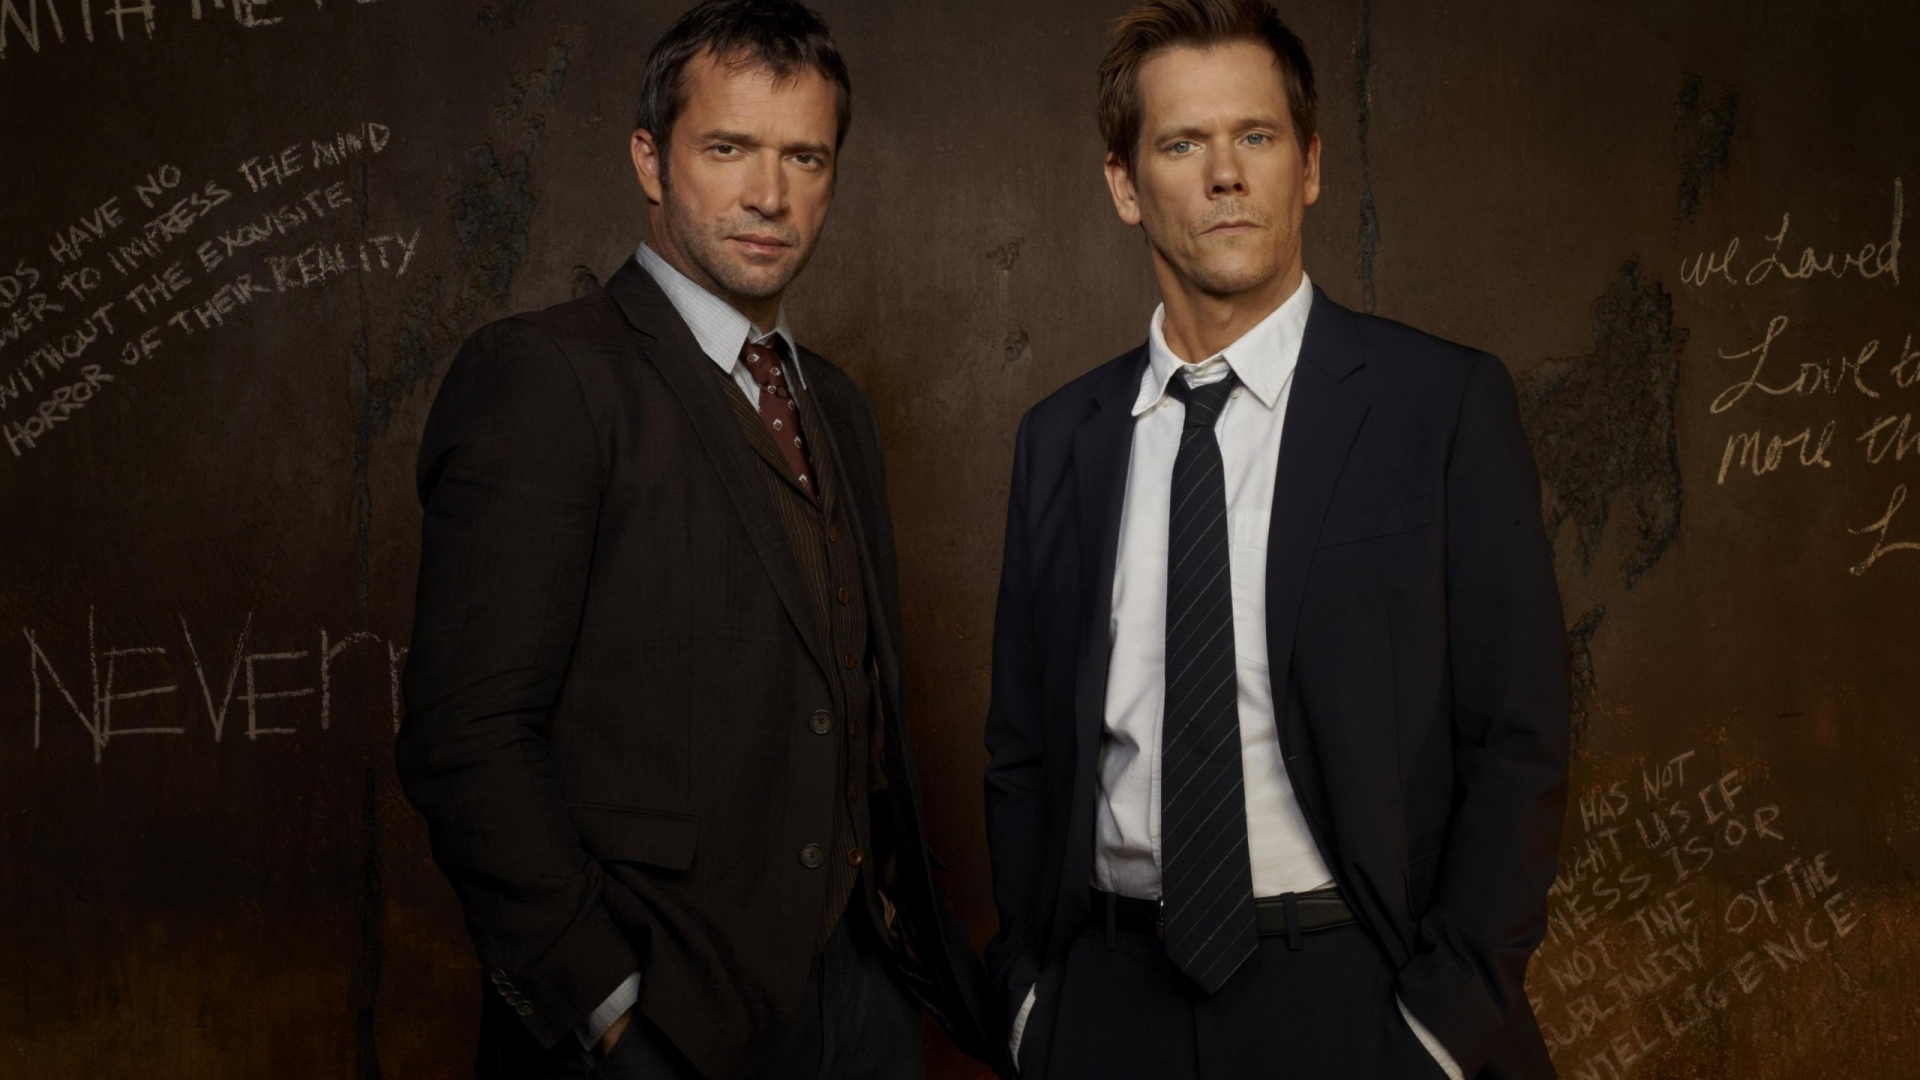 Kevin Bacon and James Purefoy for 1920 x 1080 HDTV 1080p resolution